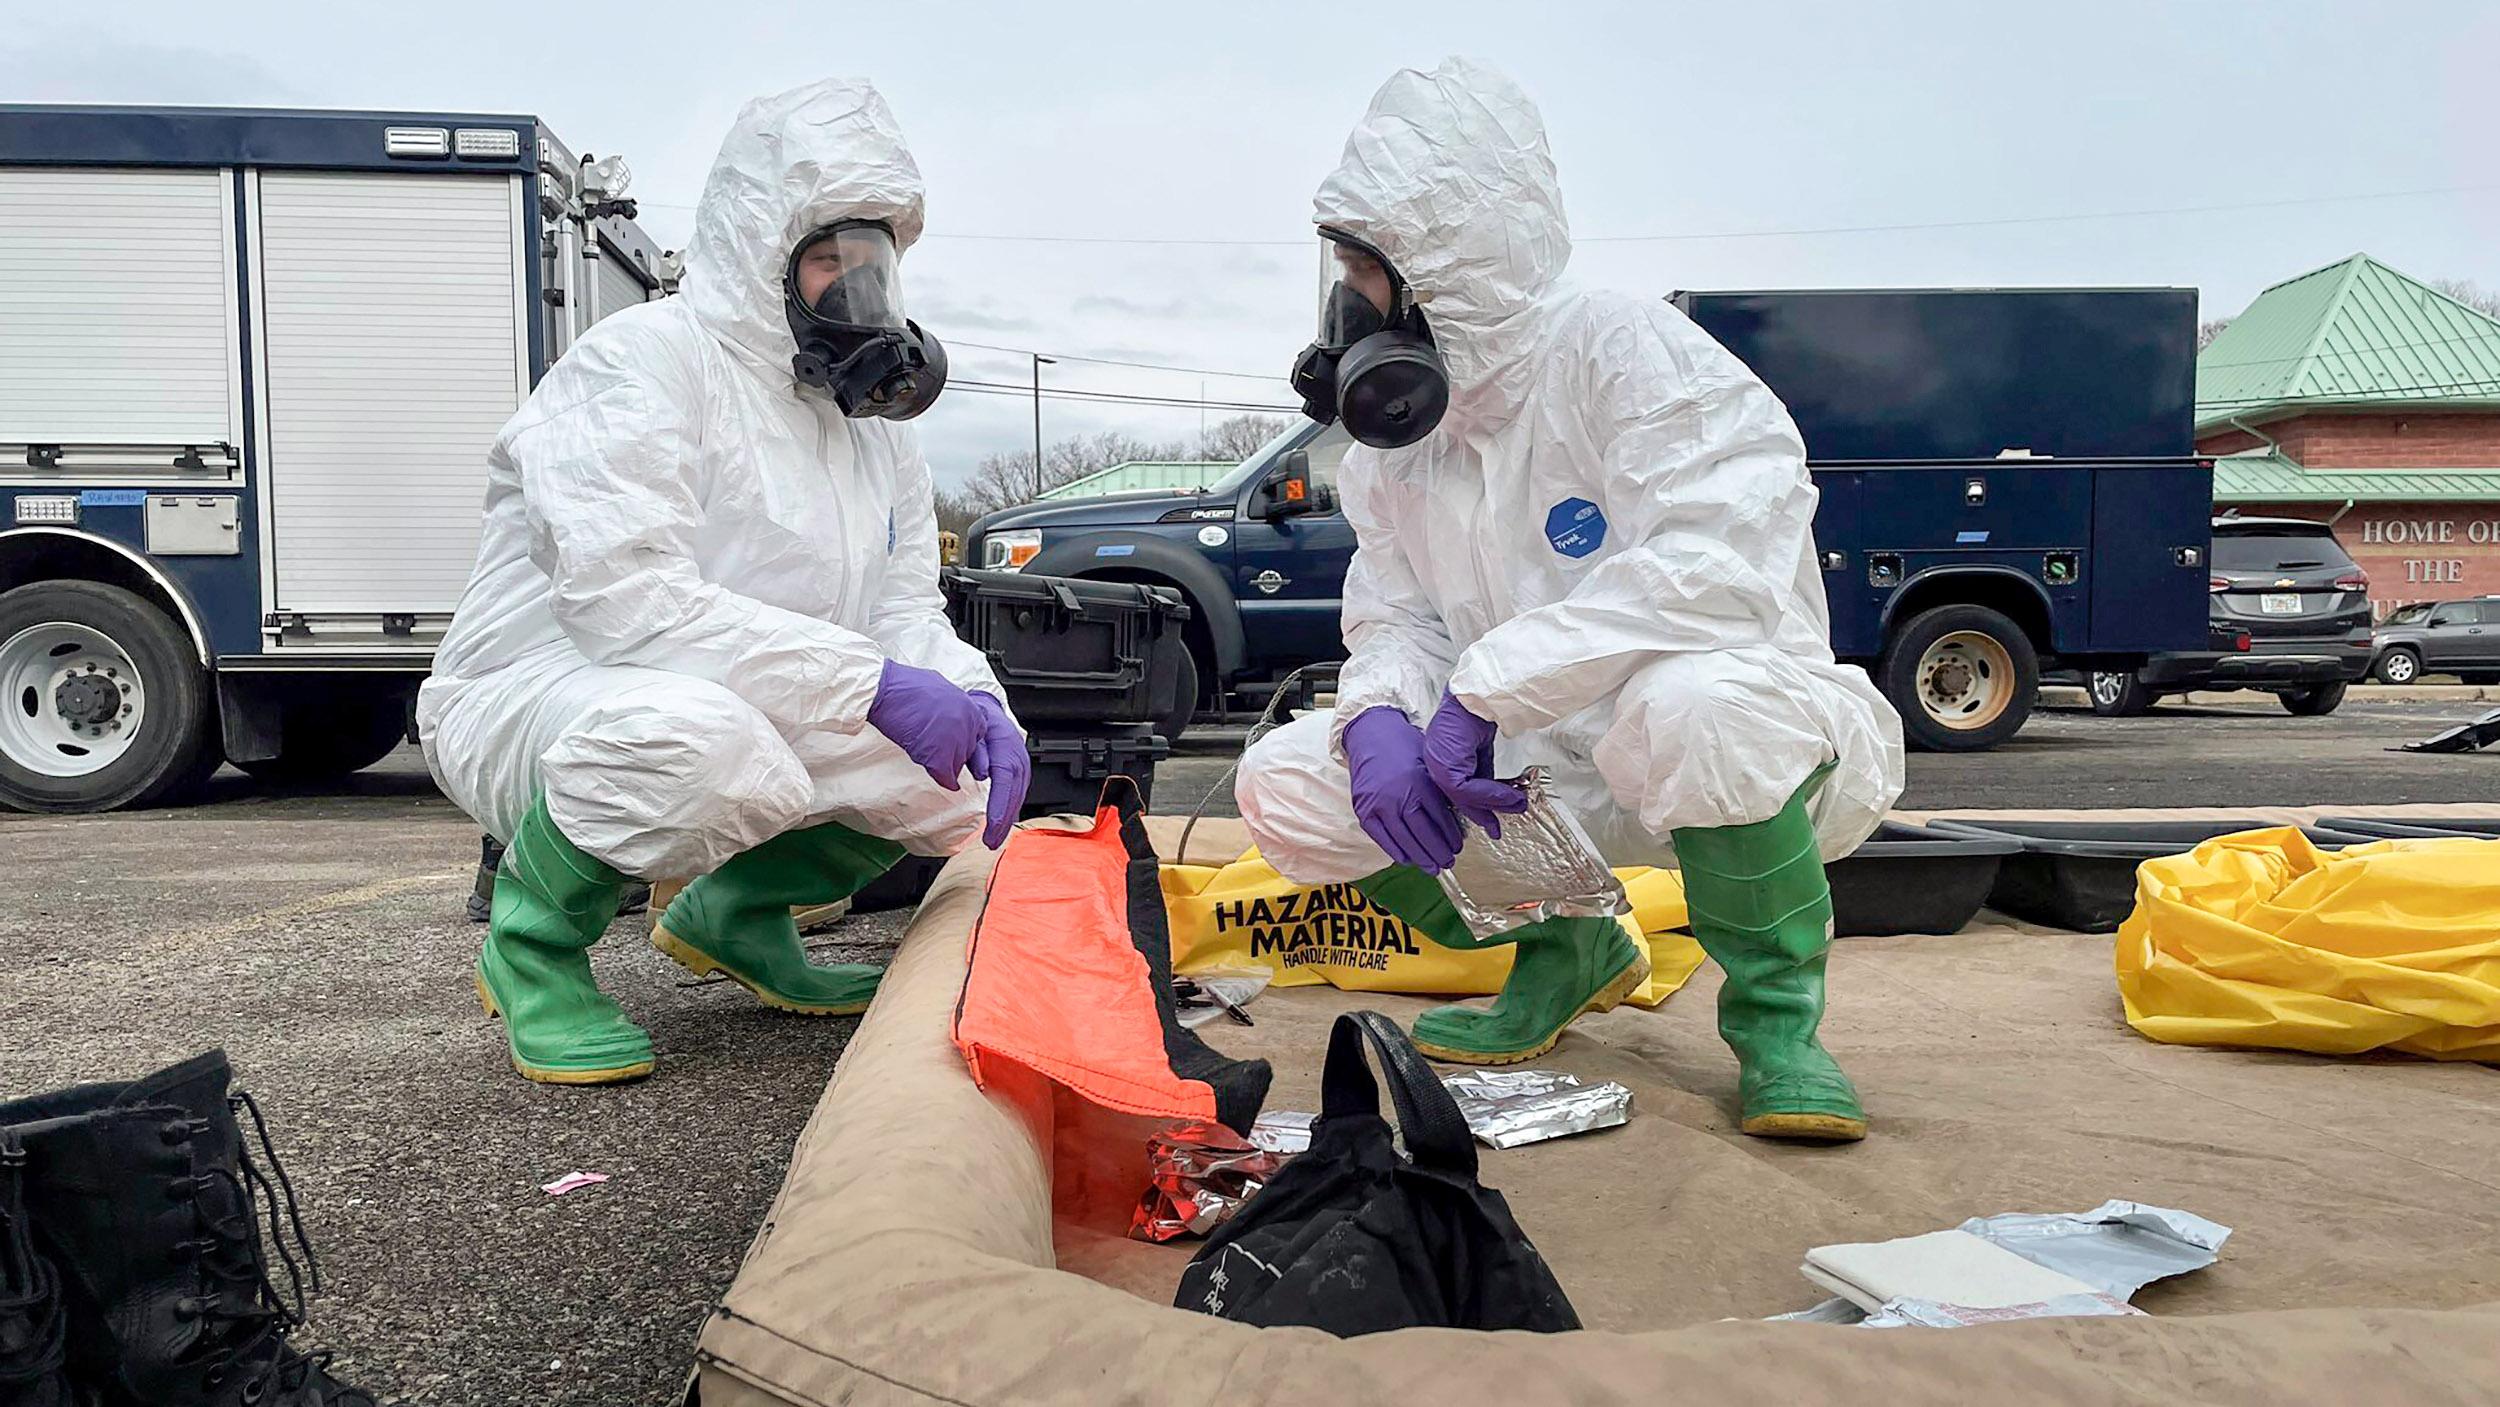 ONG 52nd Civil Support Team members prepare to enter an incident area to assess remaining hazards with a lightweight inflatable decontamination system (LIDS) in East Palestine, Ohio